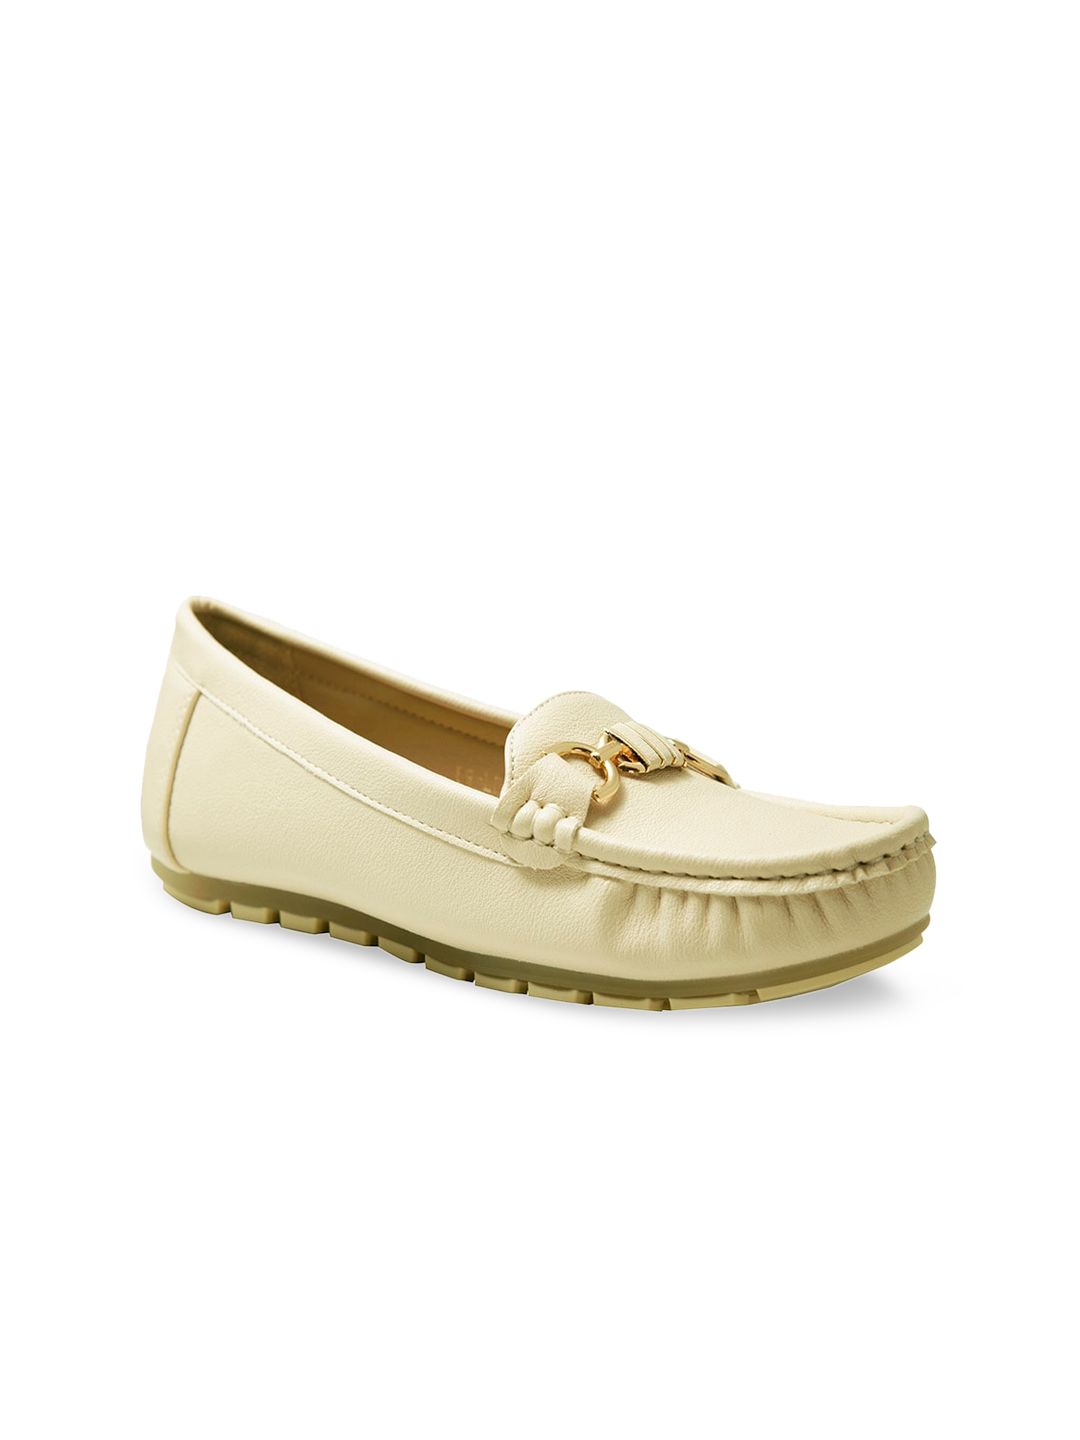 Addons Women Cream-Coloured Textured PU Loafers Price in India